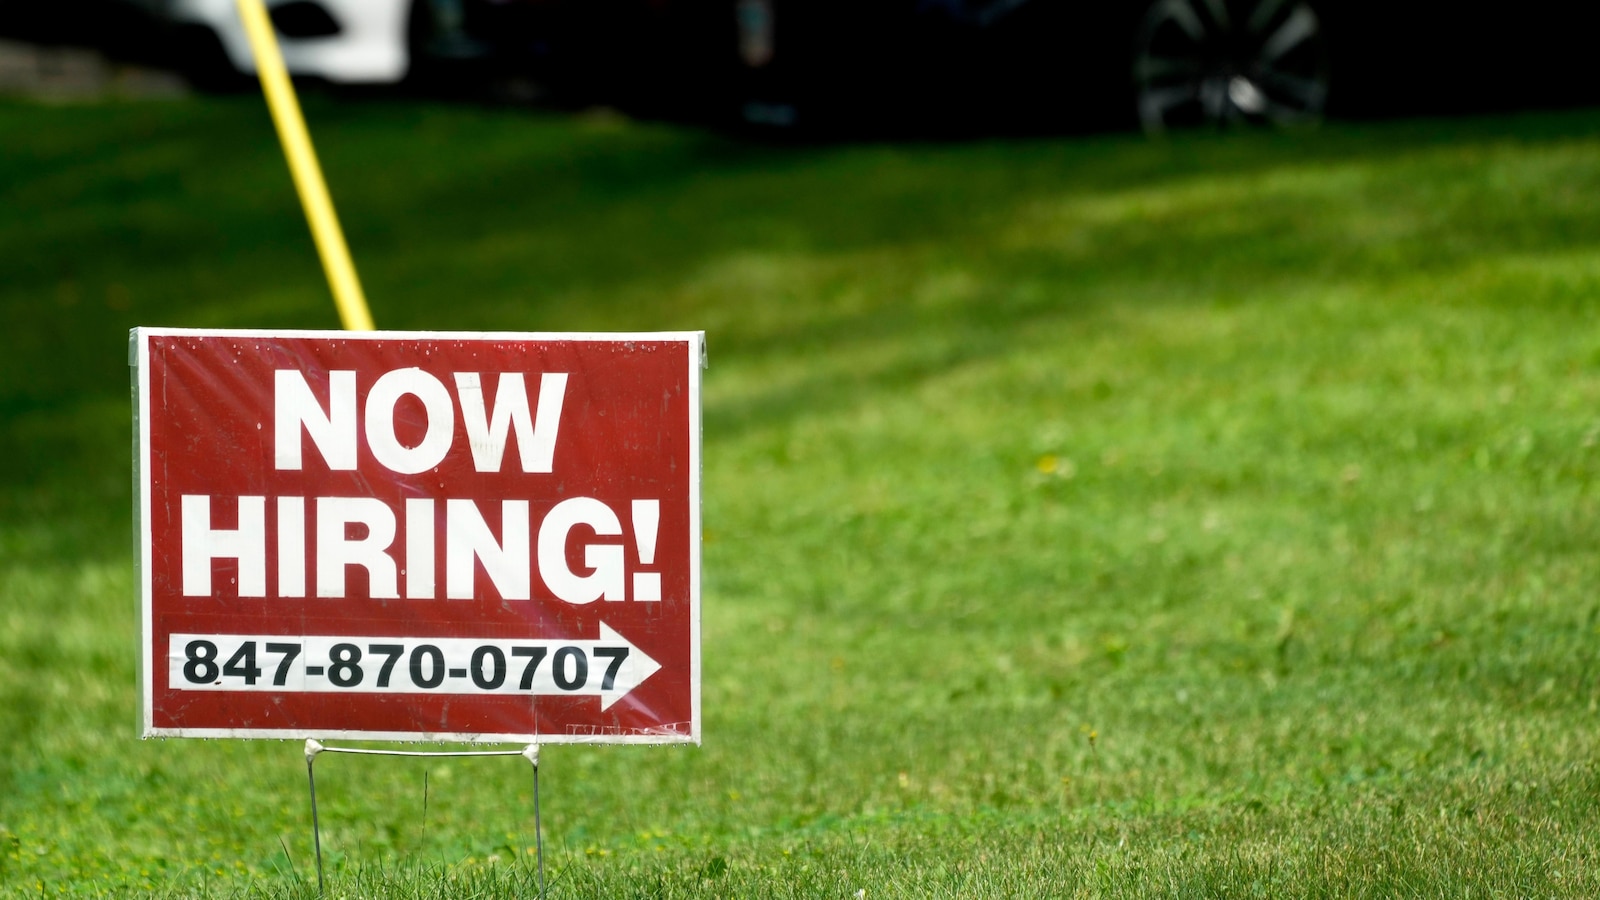 More Americans apply for jobless benefits as layoffs settle at higher levels